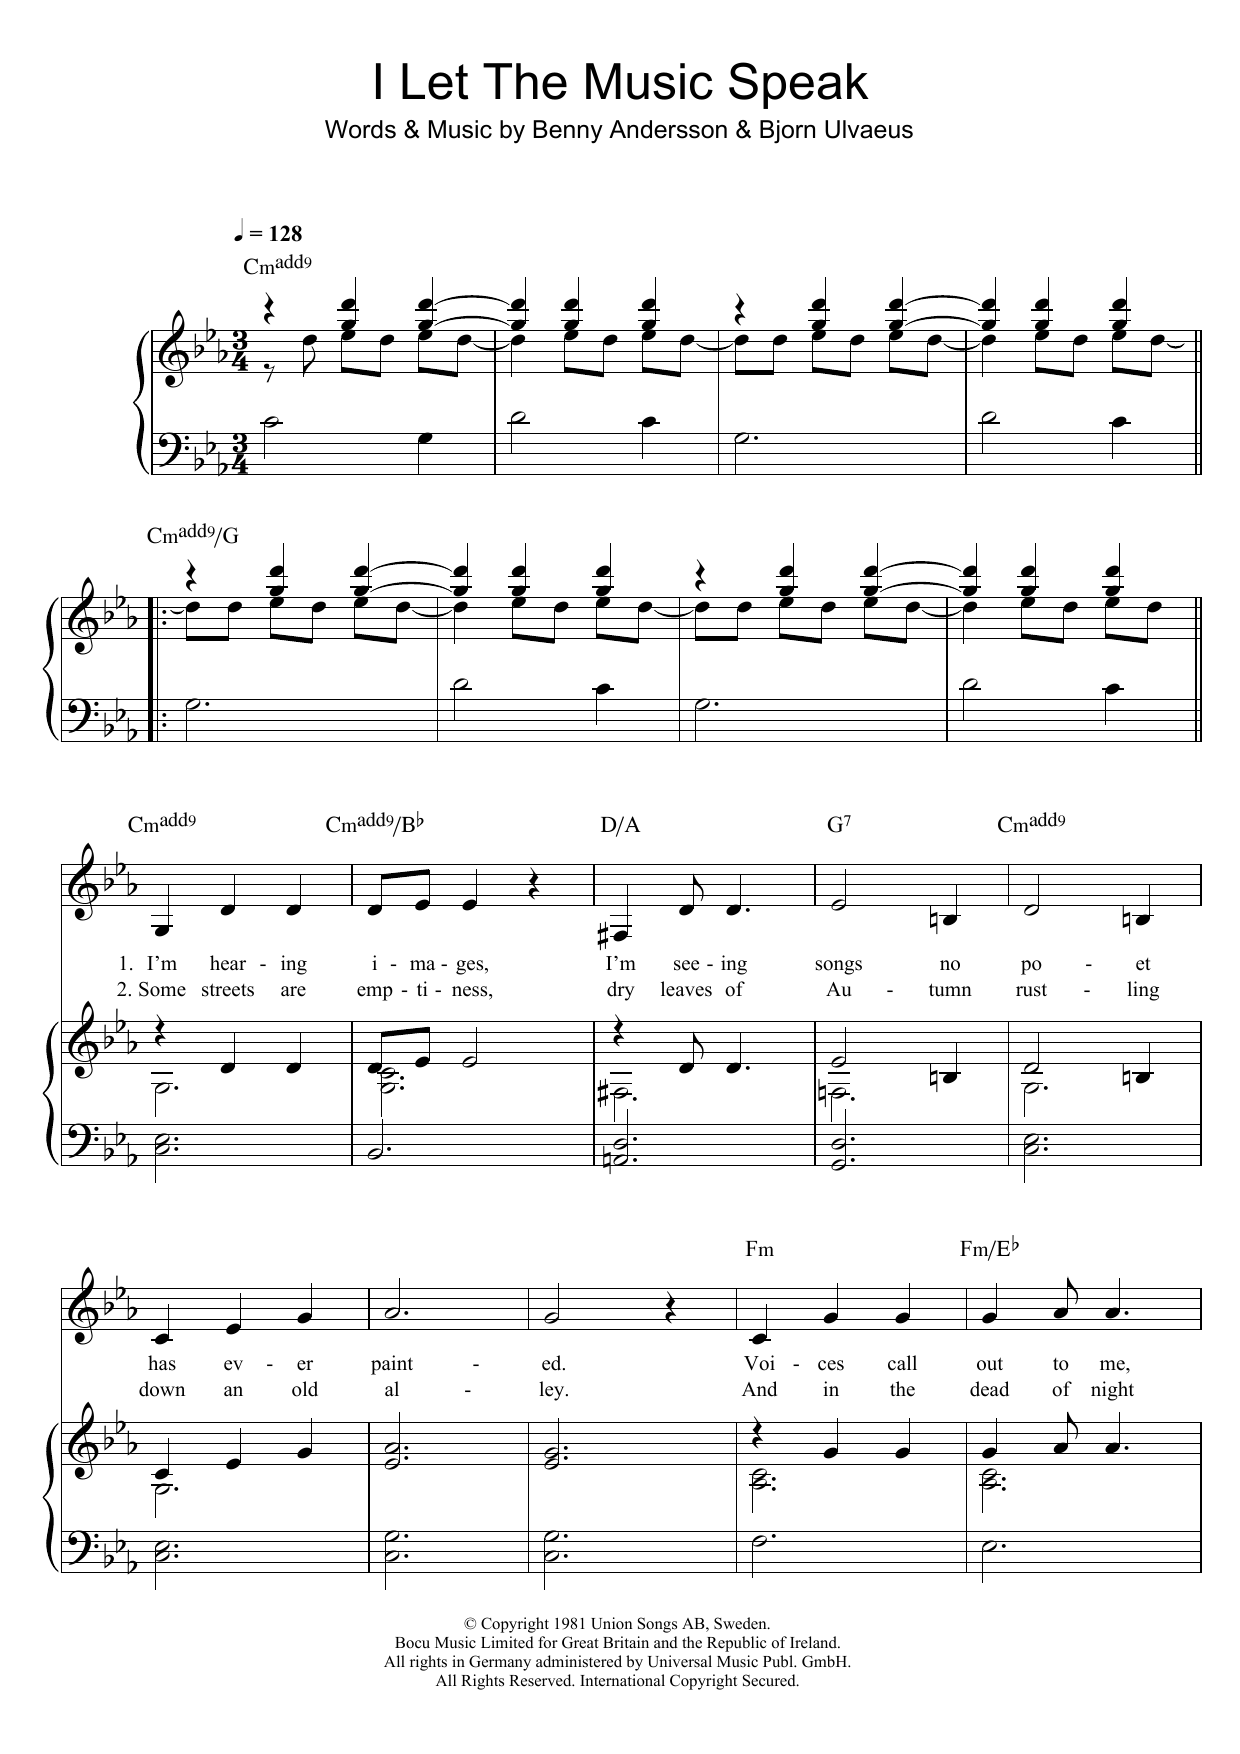 Download ABBA I Let The Music Speak Sheet Music